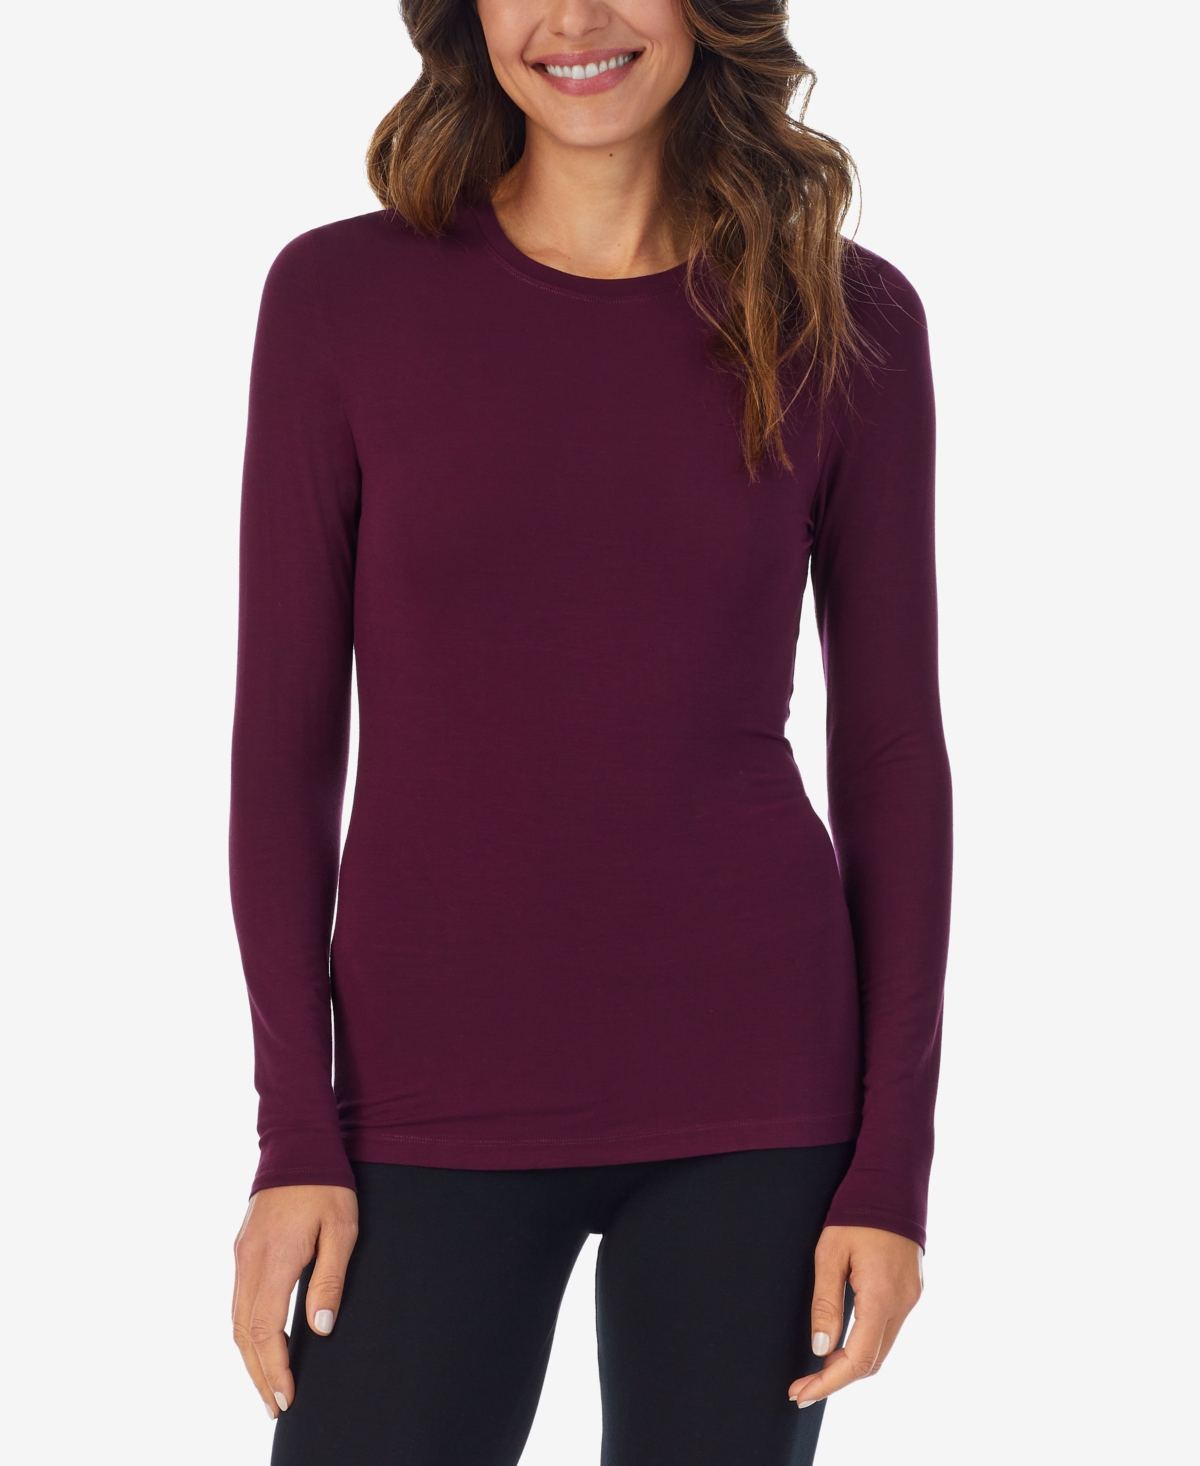 Softwear with Stretch Long-Sleeve Layering Top - Charcoal